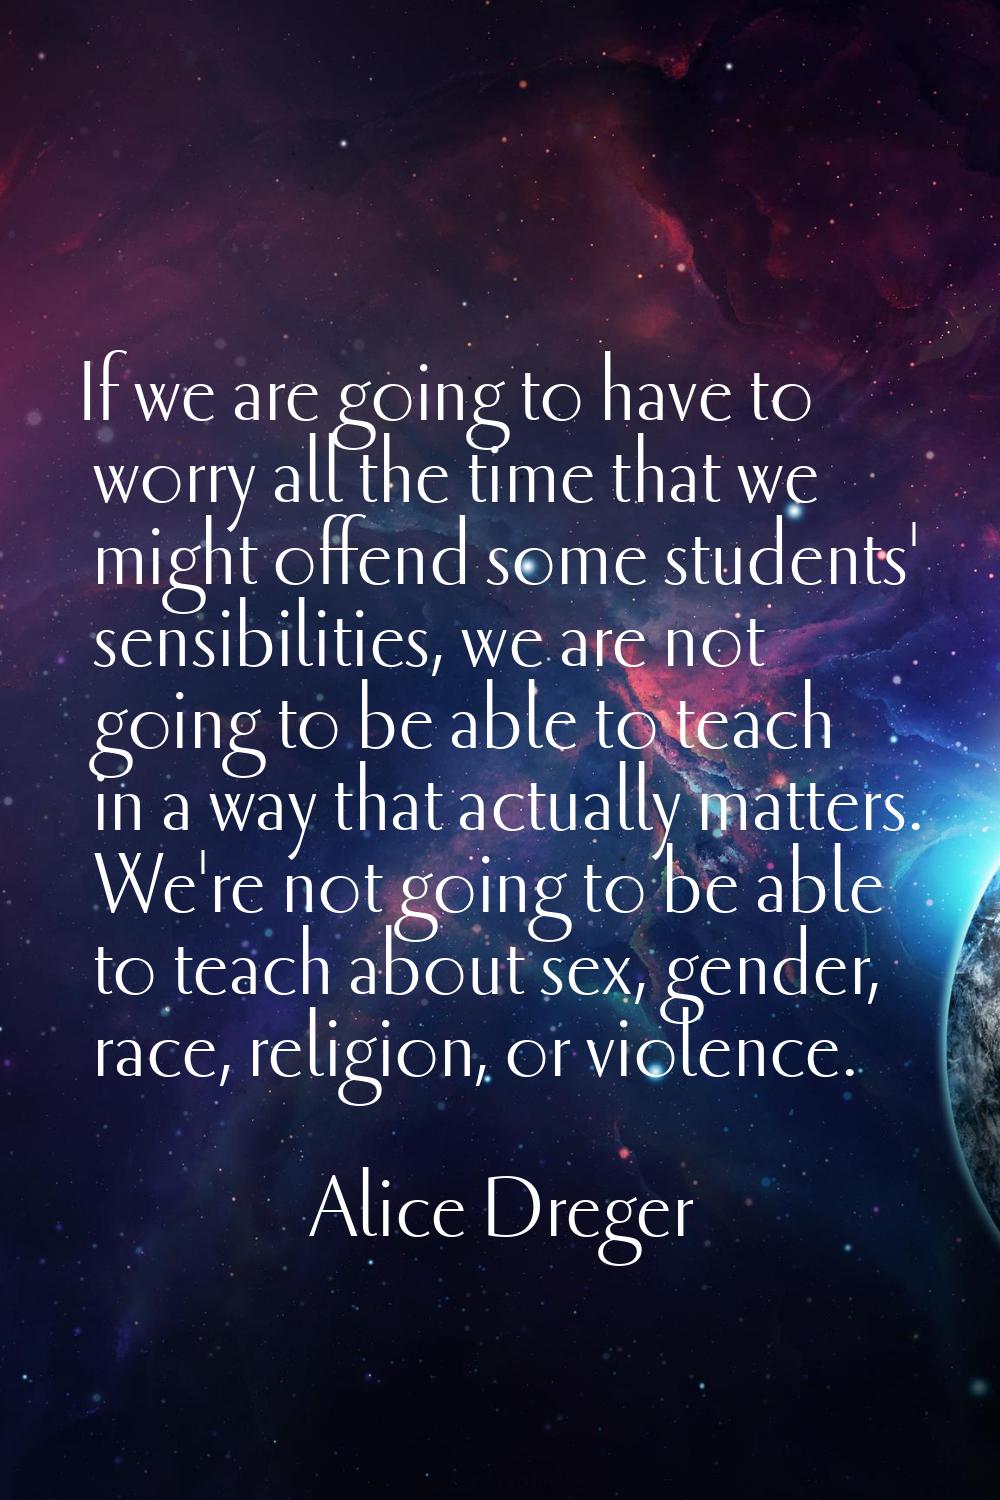 If we are going to have to worry all the time that we might offend some students' sensibilities, we